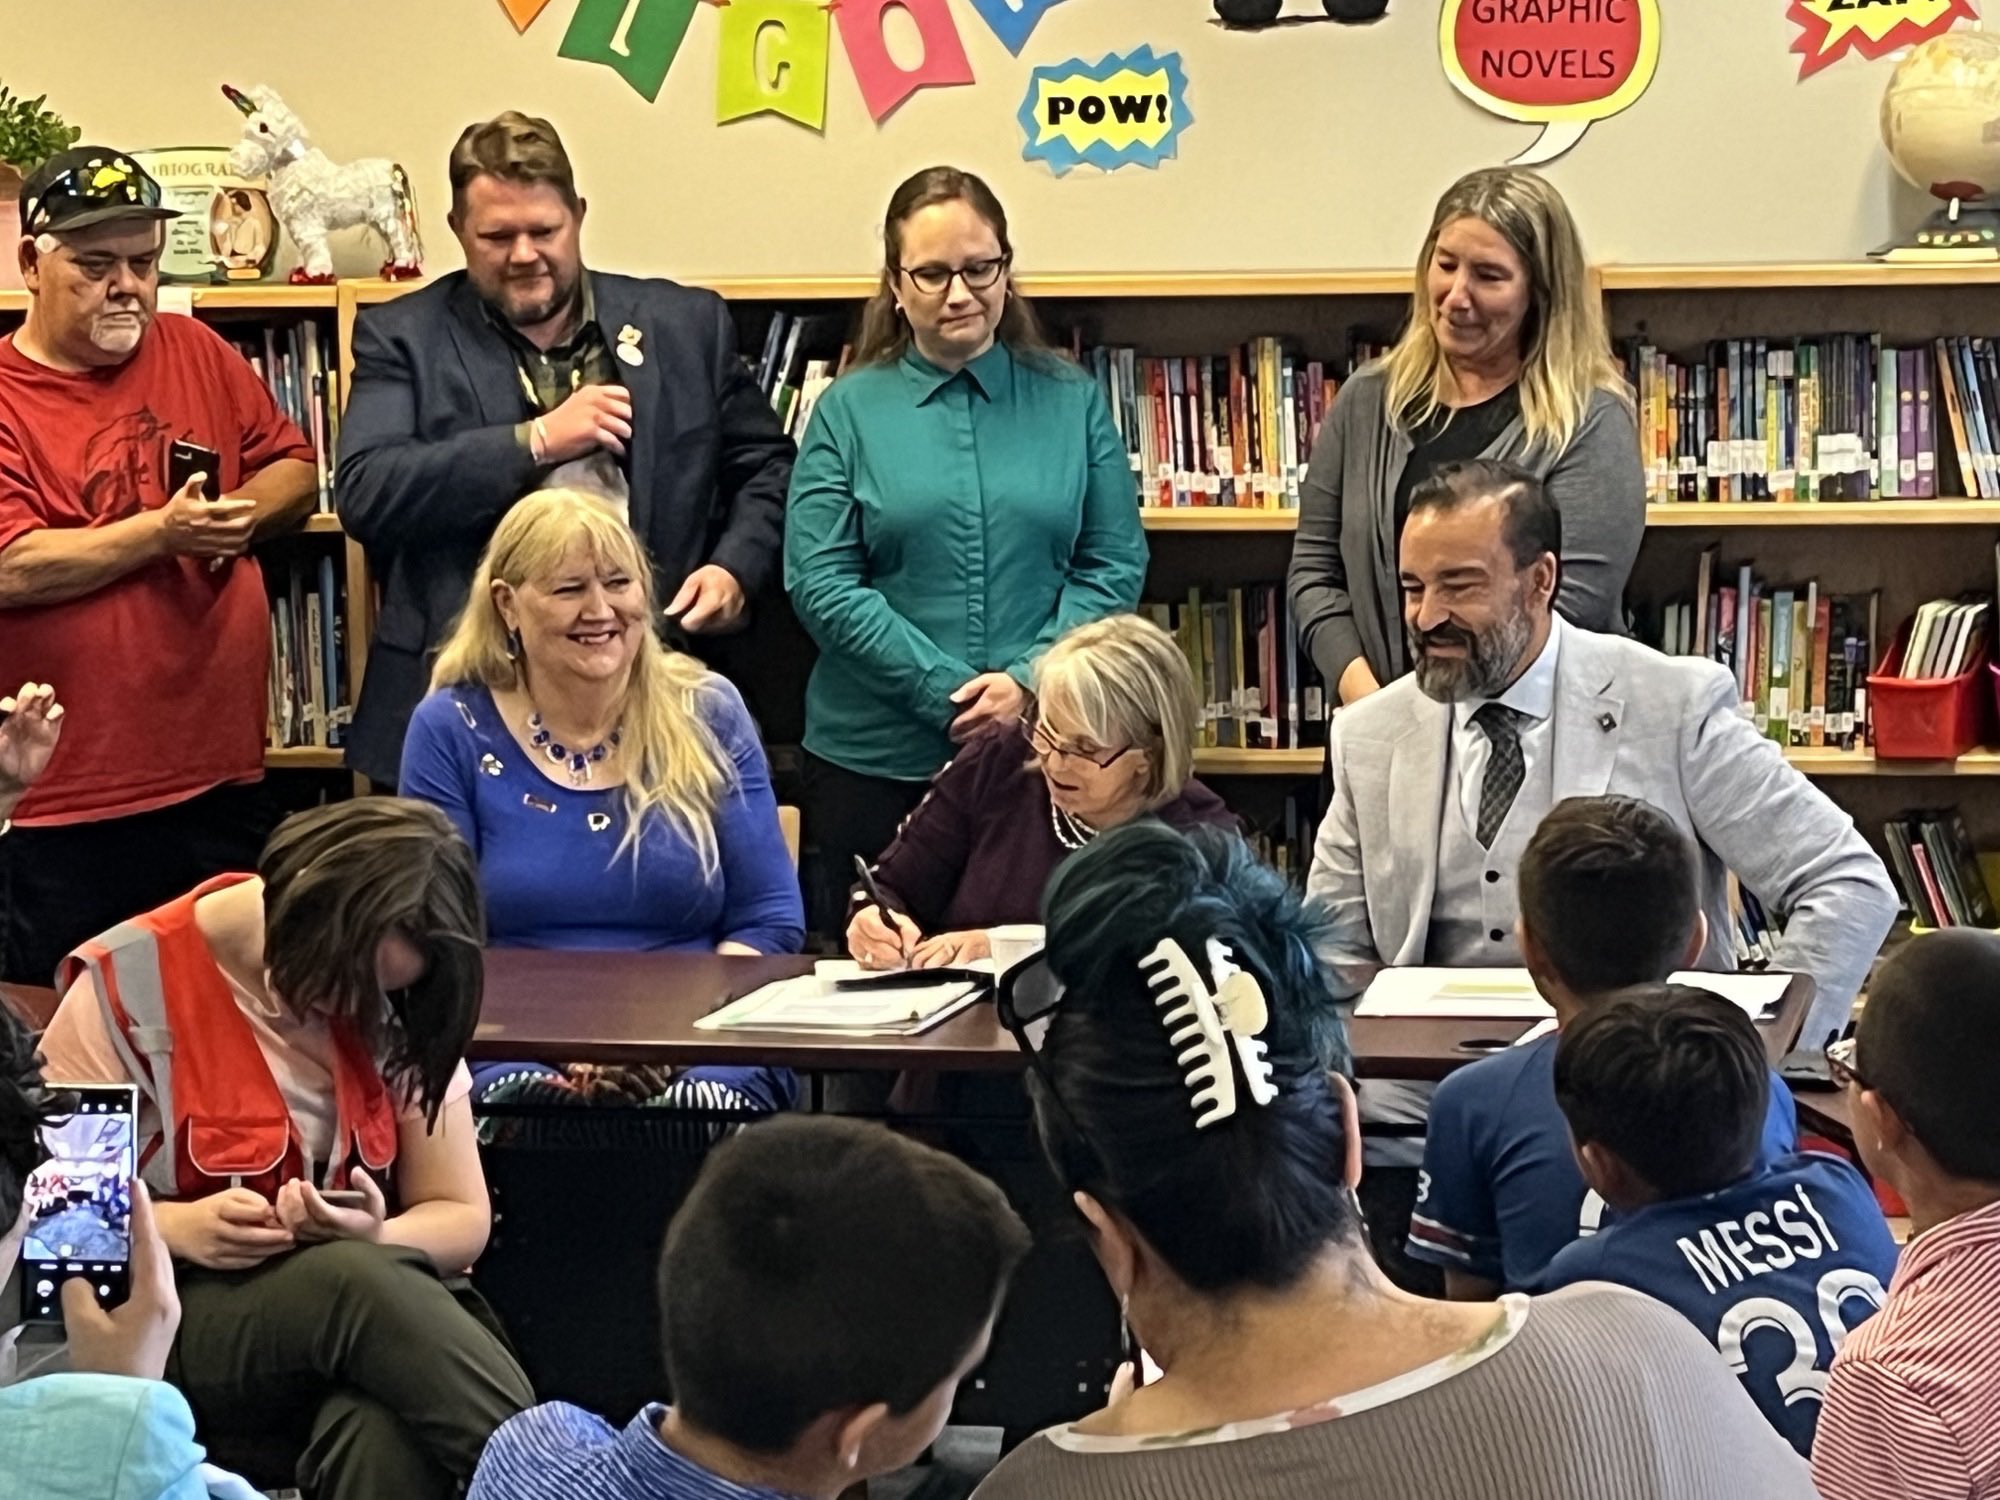 Representative Elizabeth Thomson (left), Governor Michelle Lujan Grisham, and Public Education Secretary Arsenio Romero (right) celebrated the signing of an executive order establishing the Office of Special Education in the Public Education Department while surrounded by parents and children in the library of Lowell Elementary School on May 25.